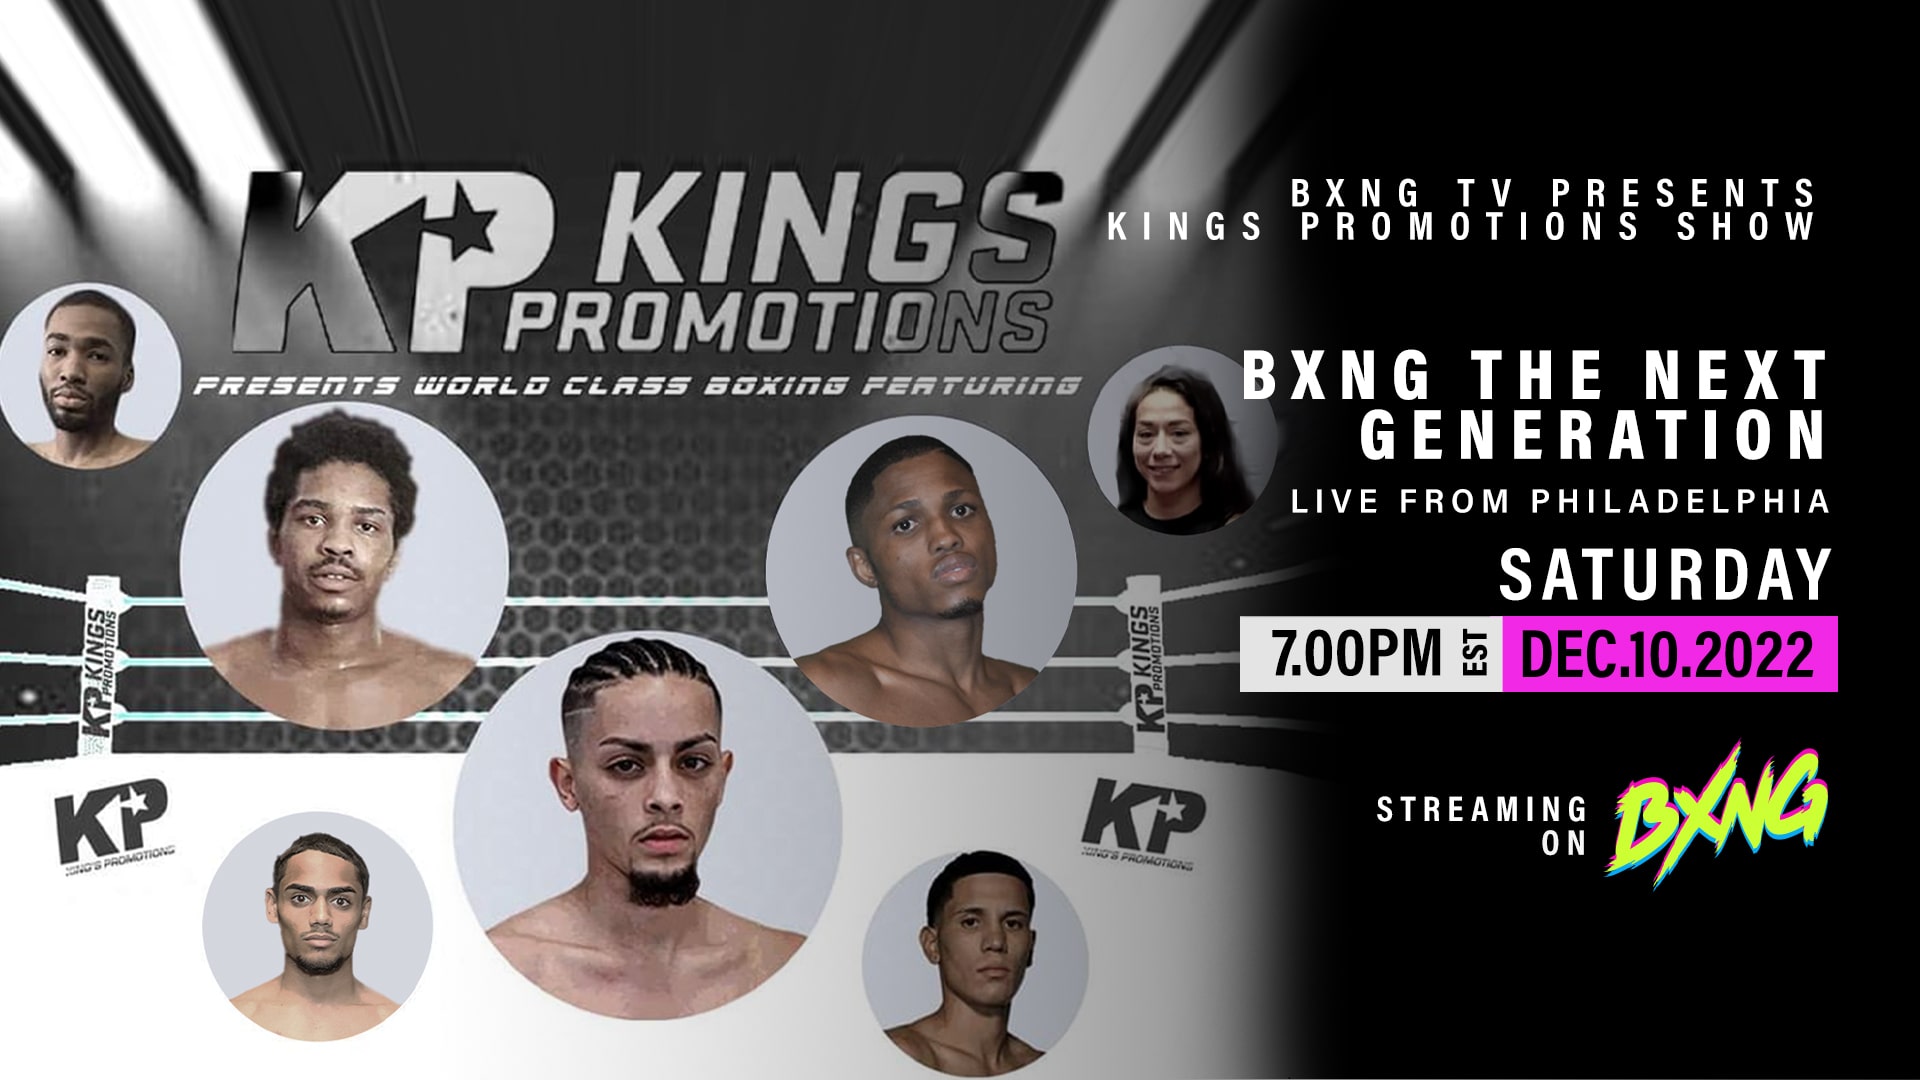 BXNG TV Presents Kings Promotions Show Live Stream 12/10/22